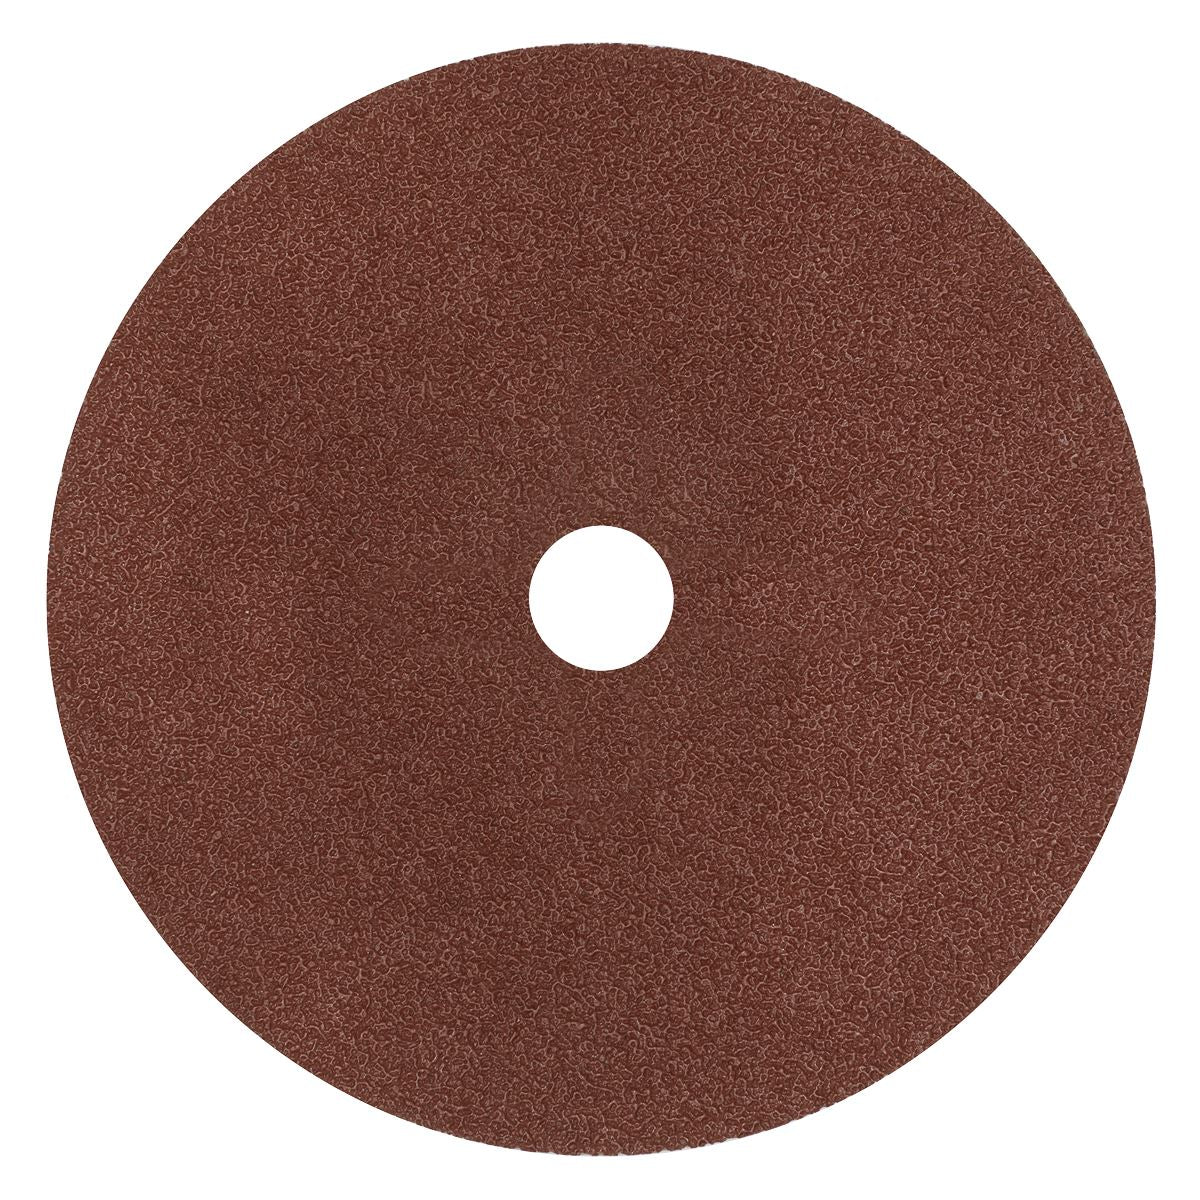 Worksafe by Sealey Fibre Backed Disc Ø175mm - 40Grit Pack of 25